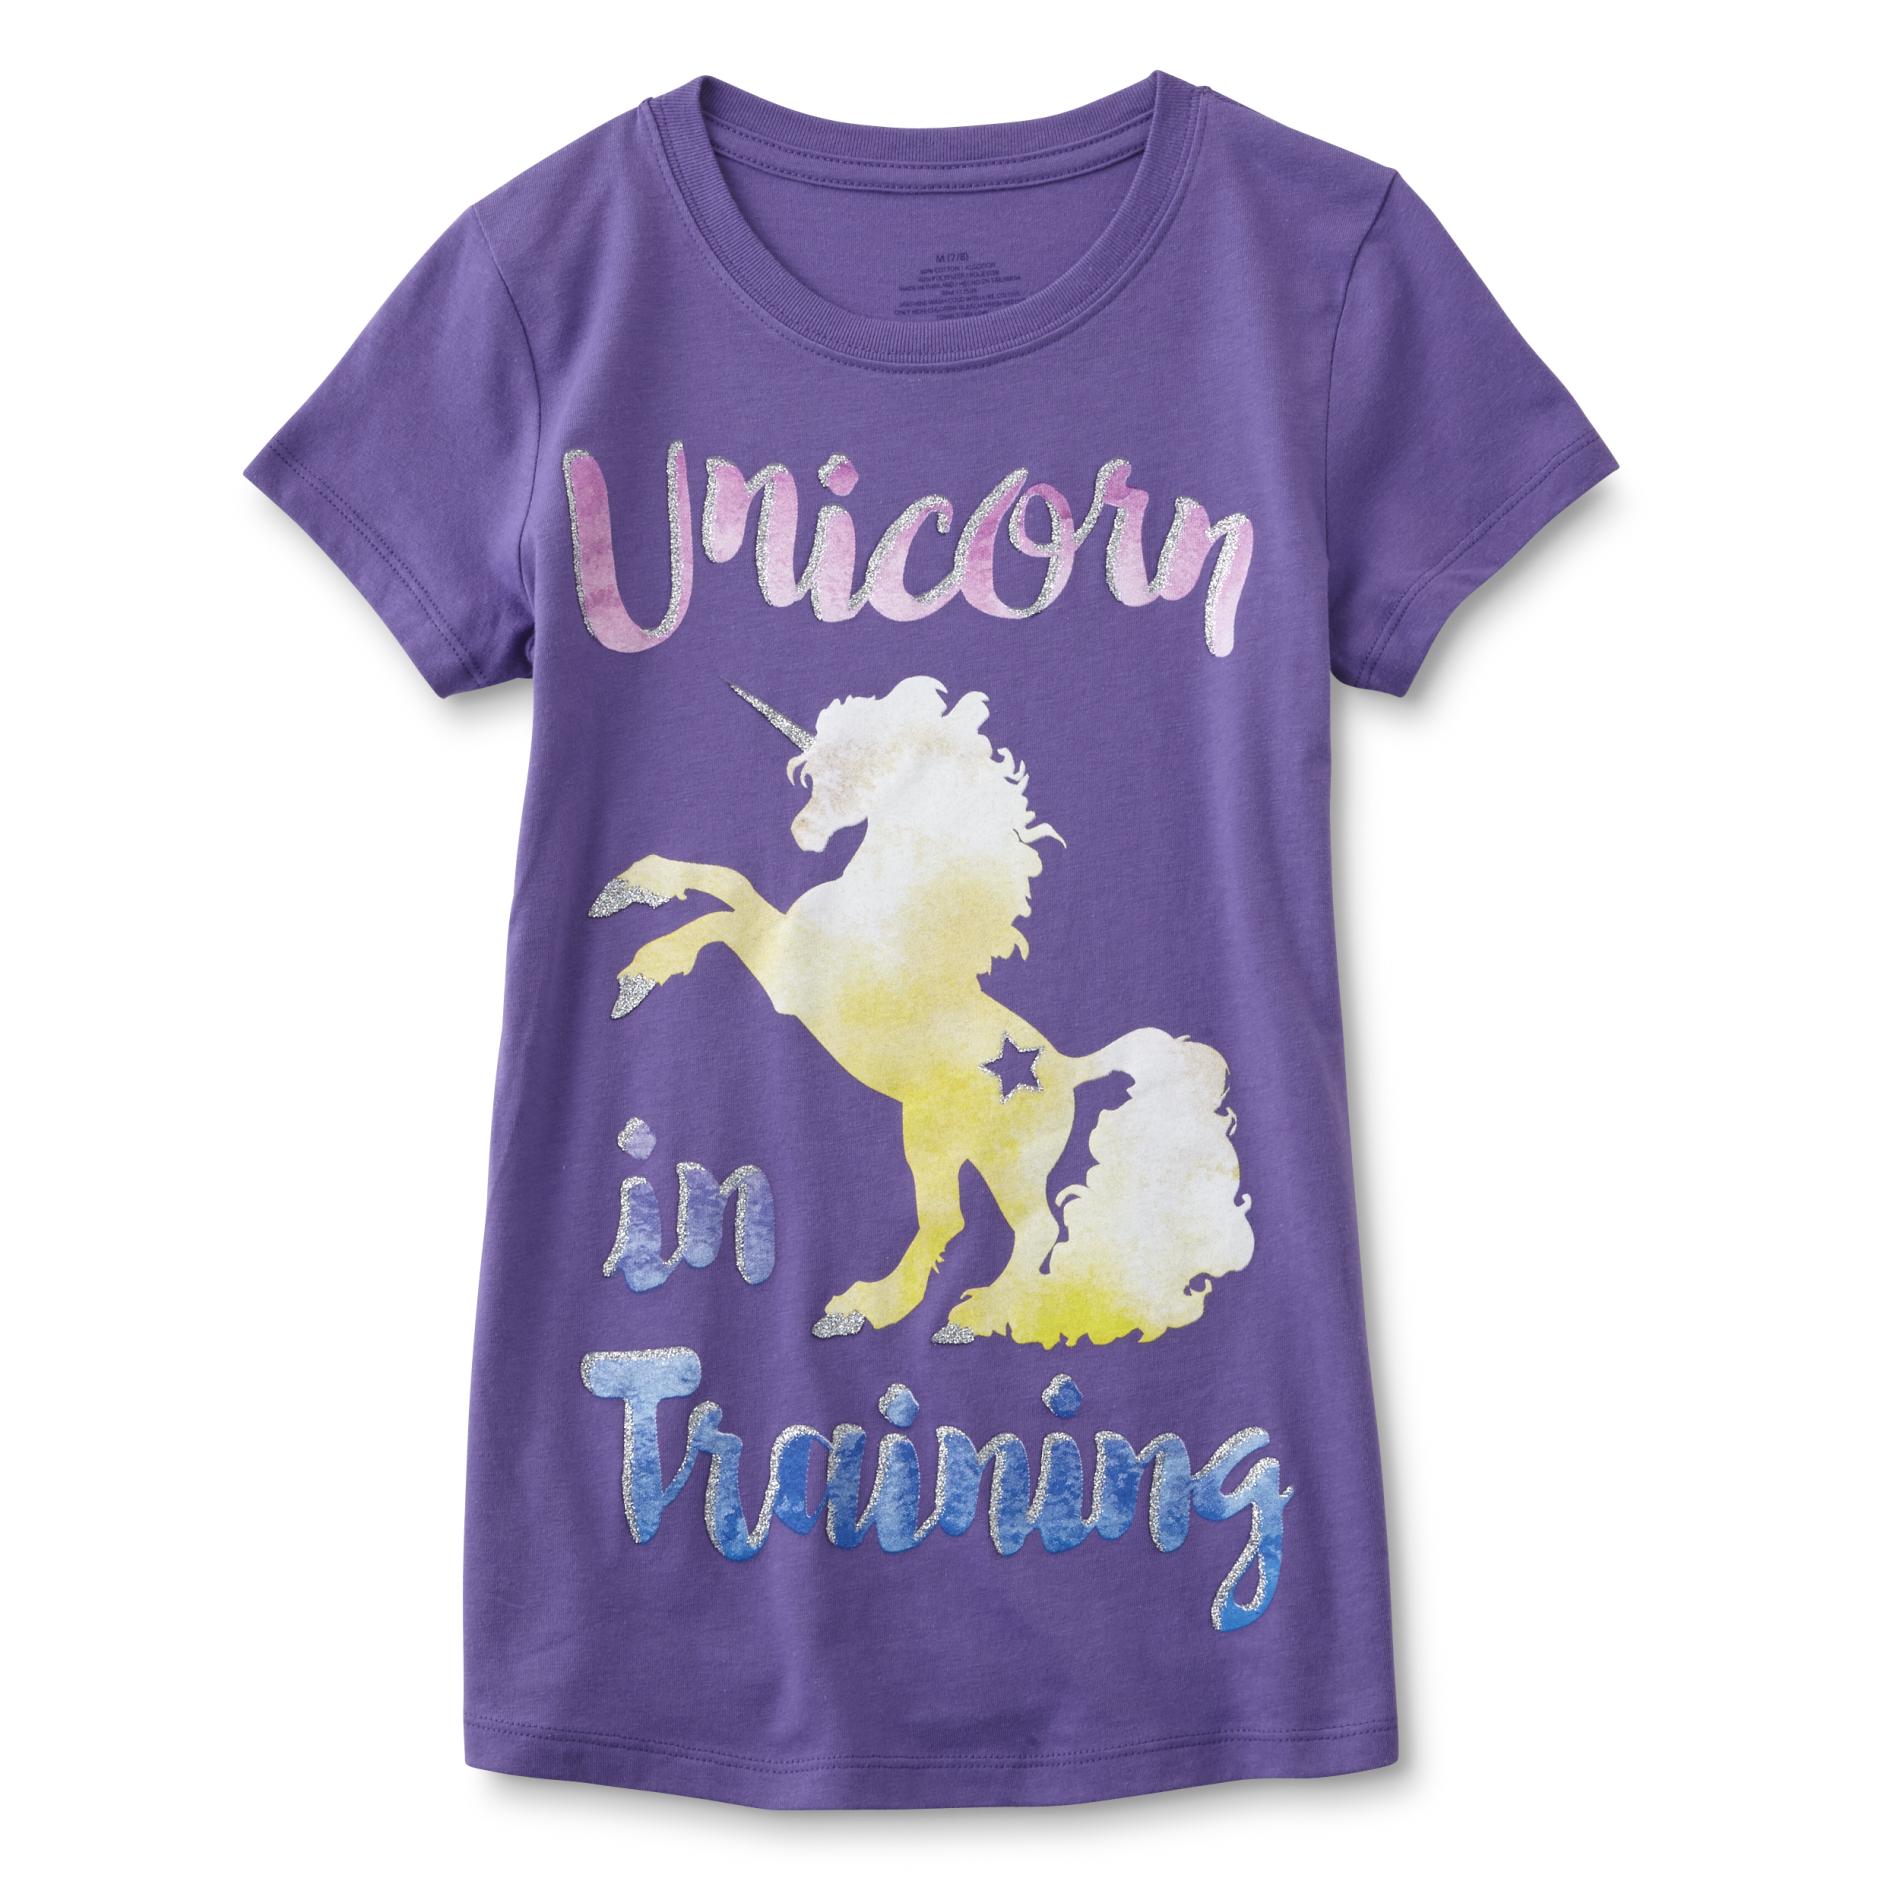 Route 66 Girl's Graphic T-Shirt - Unicorn in Training